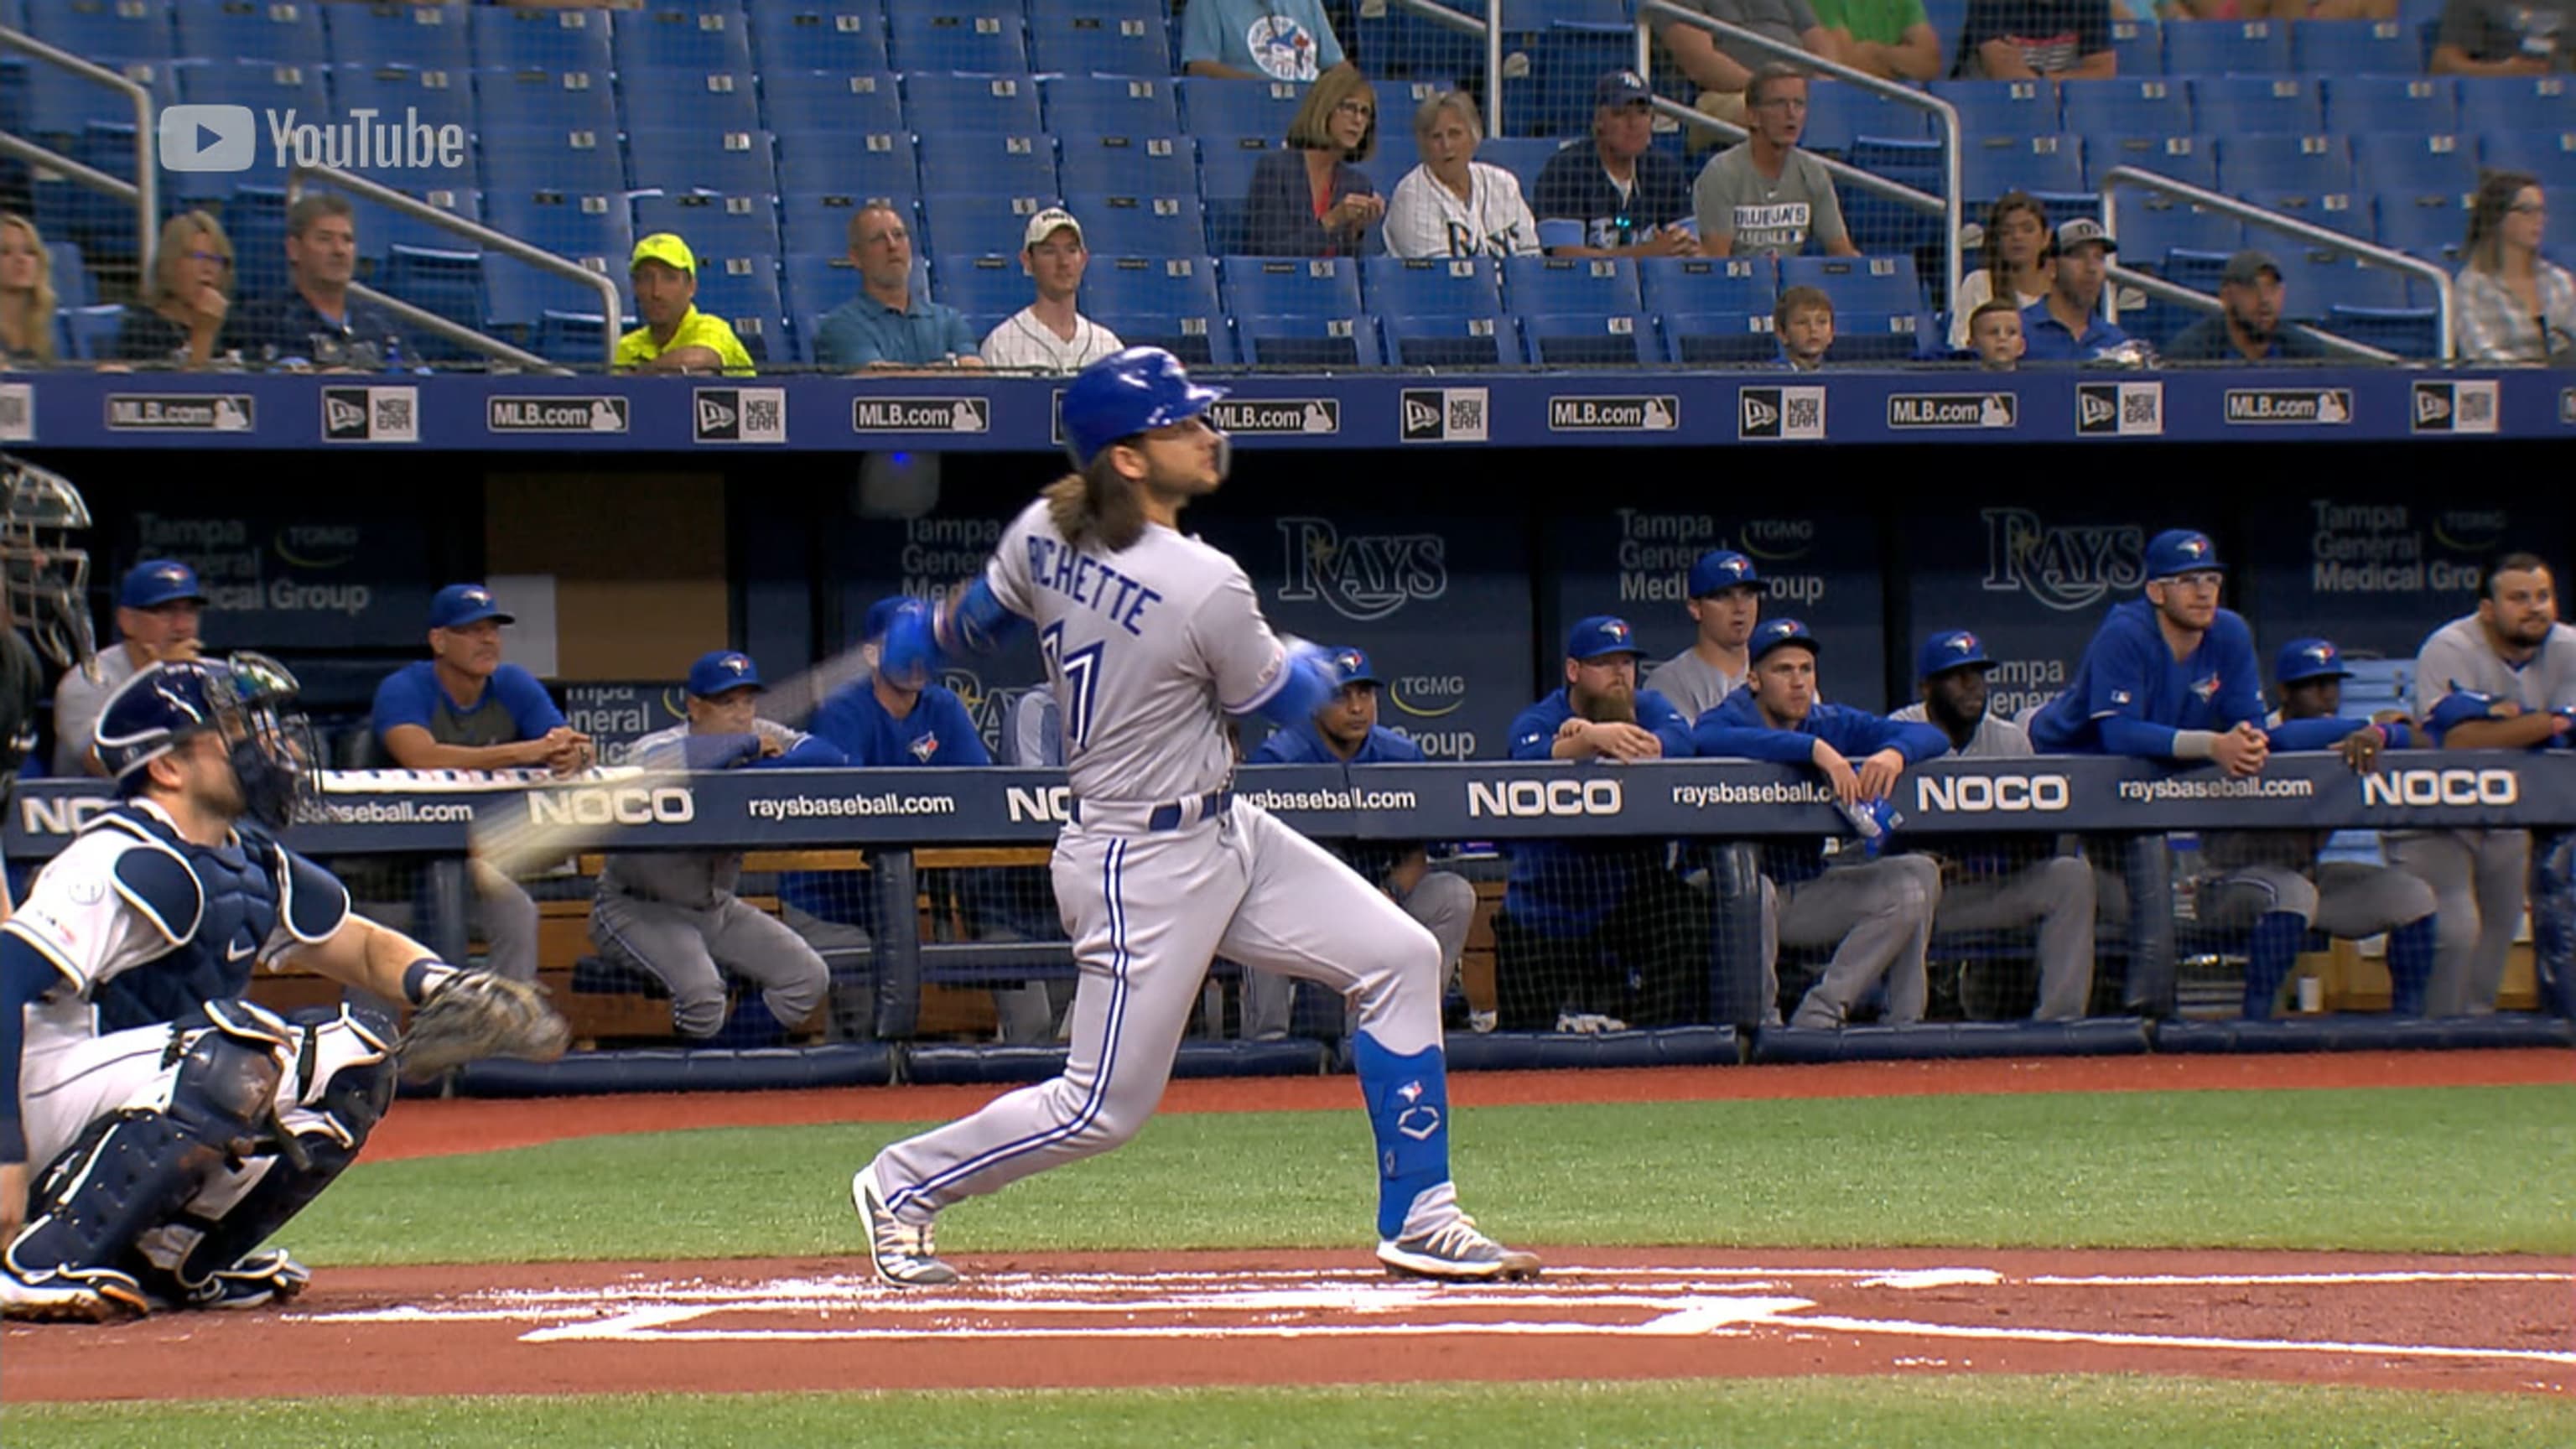 Bichette Late HR, Jays Edge Rays in Testy Contender Matchup